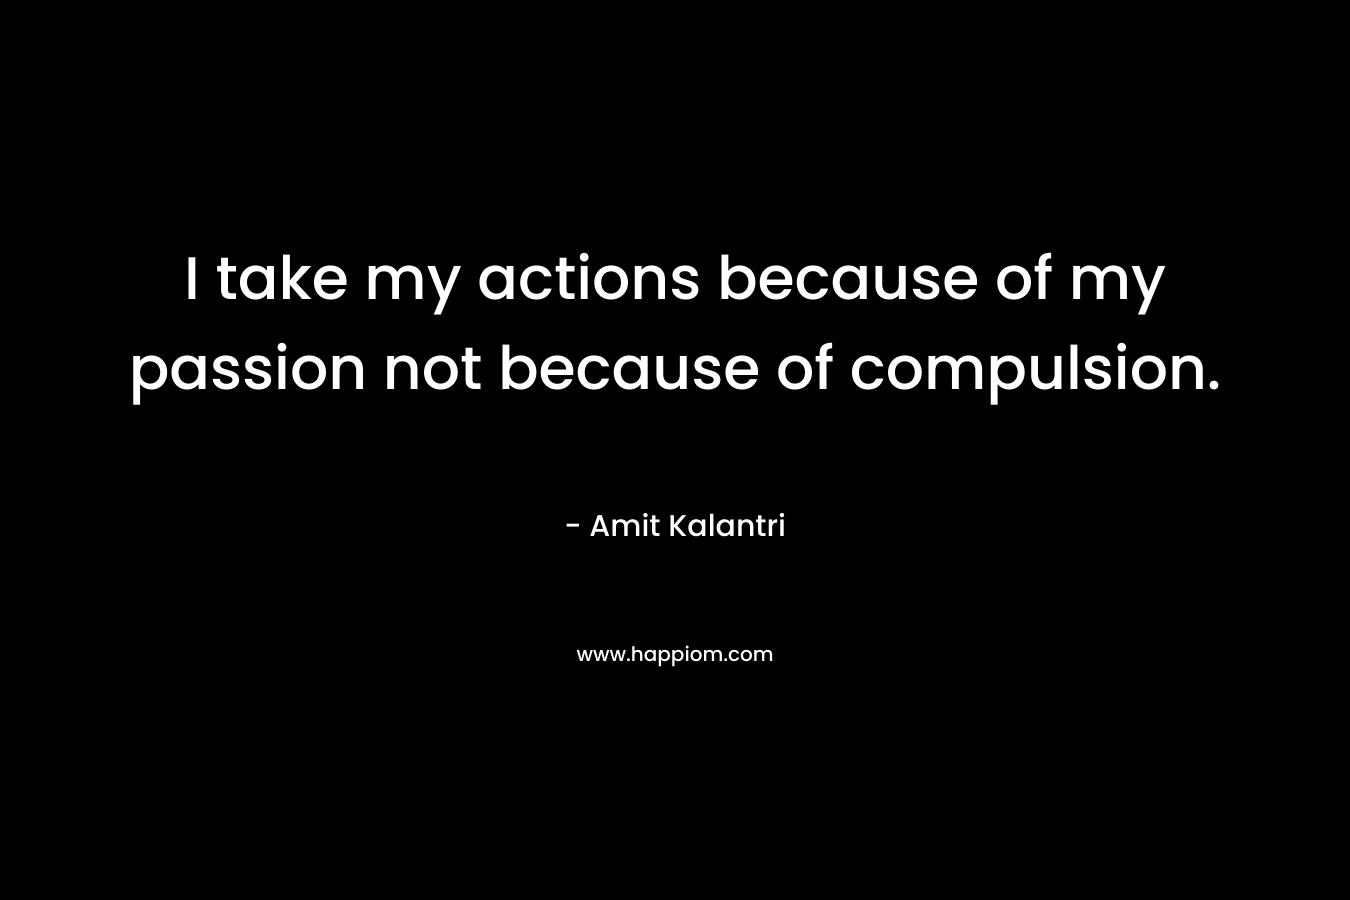 I take my actions because of my passion not because of compulsion.